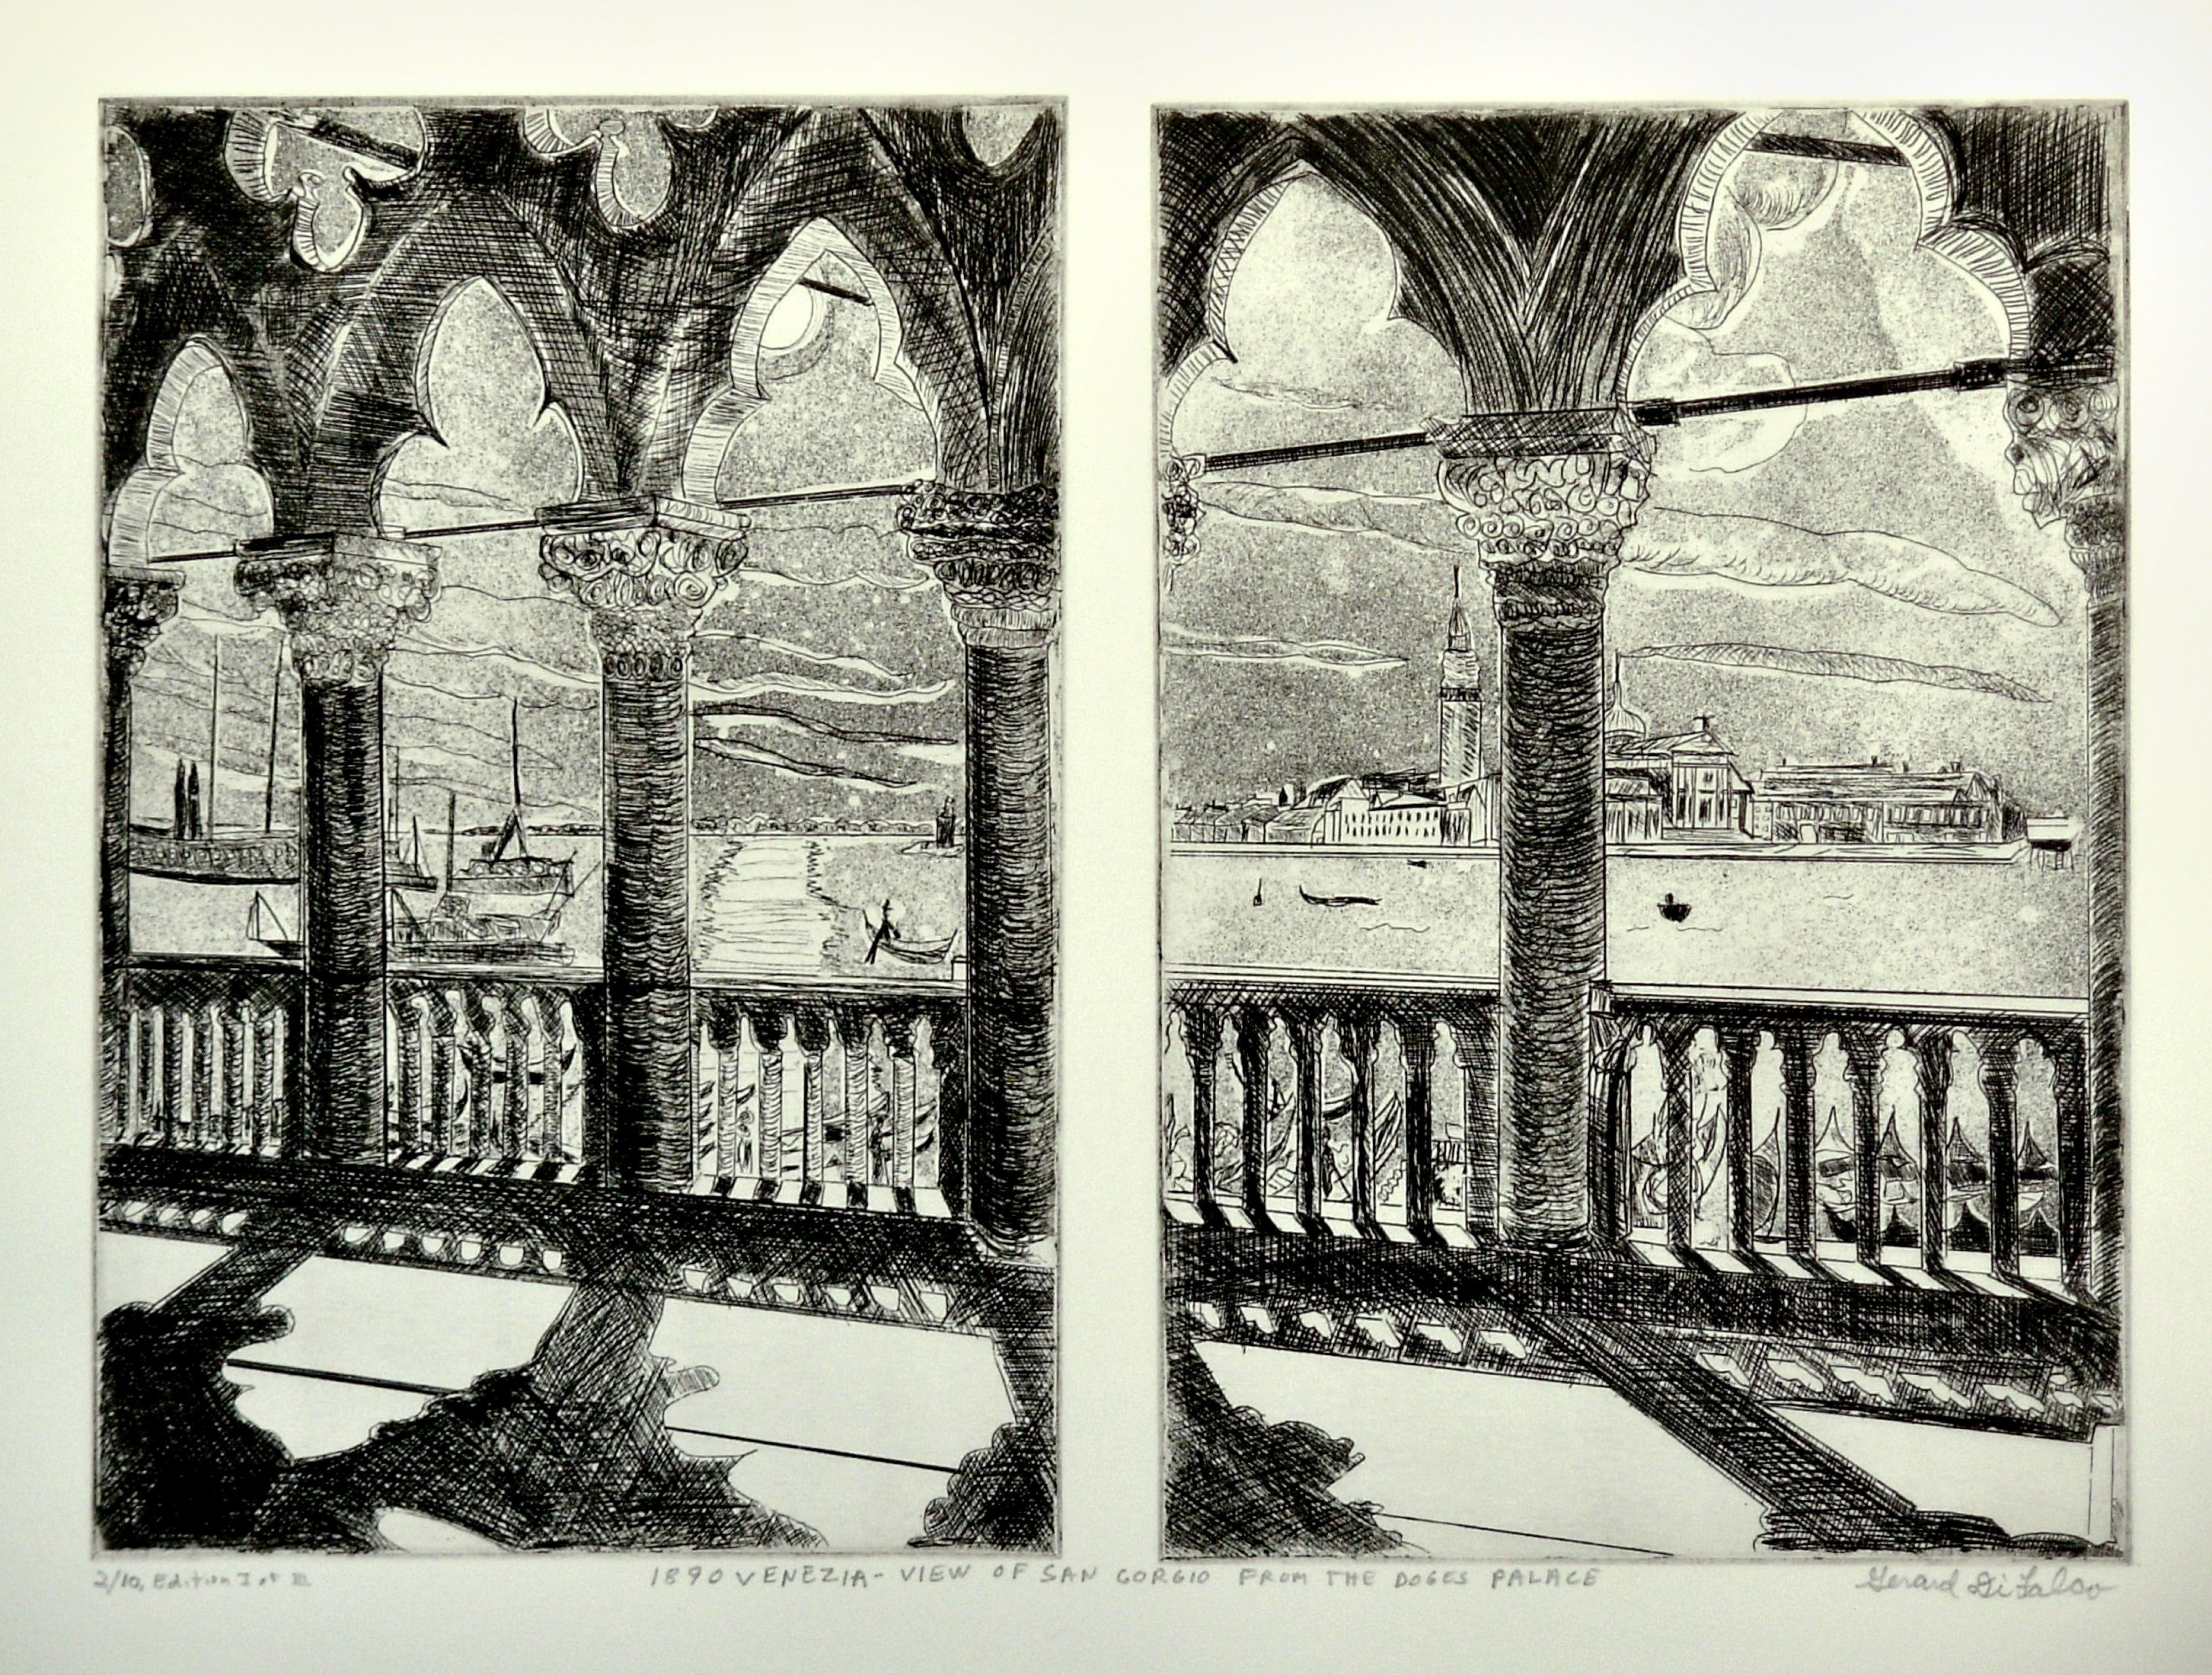 Jerry  Di Falco: 'Venice from the Palace of the Doge', 2011 Intaglio, Landmarks. Title is, 1890 Venice View of San Gorgio from the Palace of the Doge. For this etching I employed the printmaking techniques of intaglio, aquatint, and drypoint and executed the work on two individual zinc plates to constitute one printed image. The scene was adapted from an 1890 photograph in ...